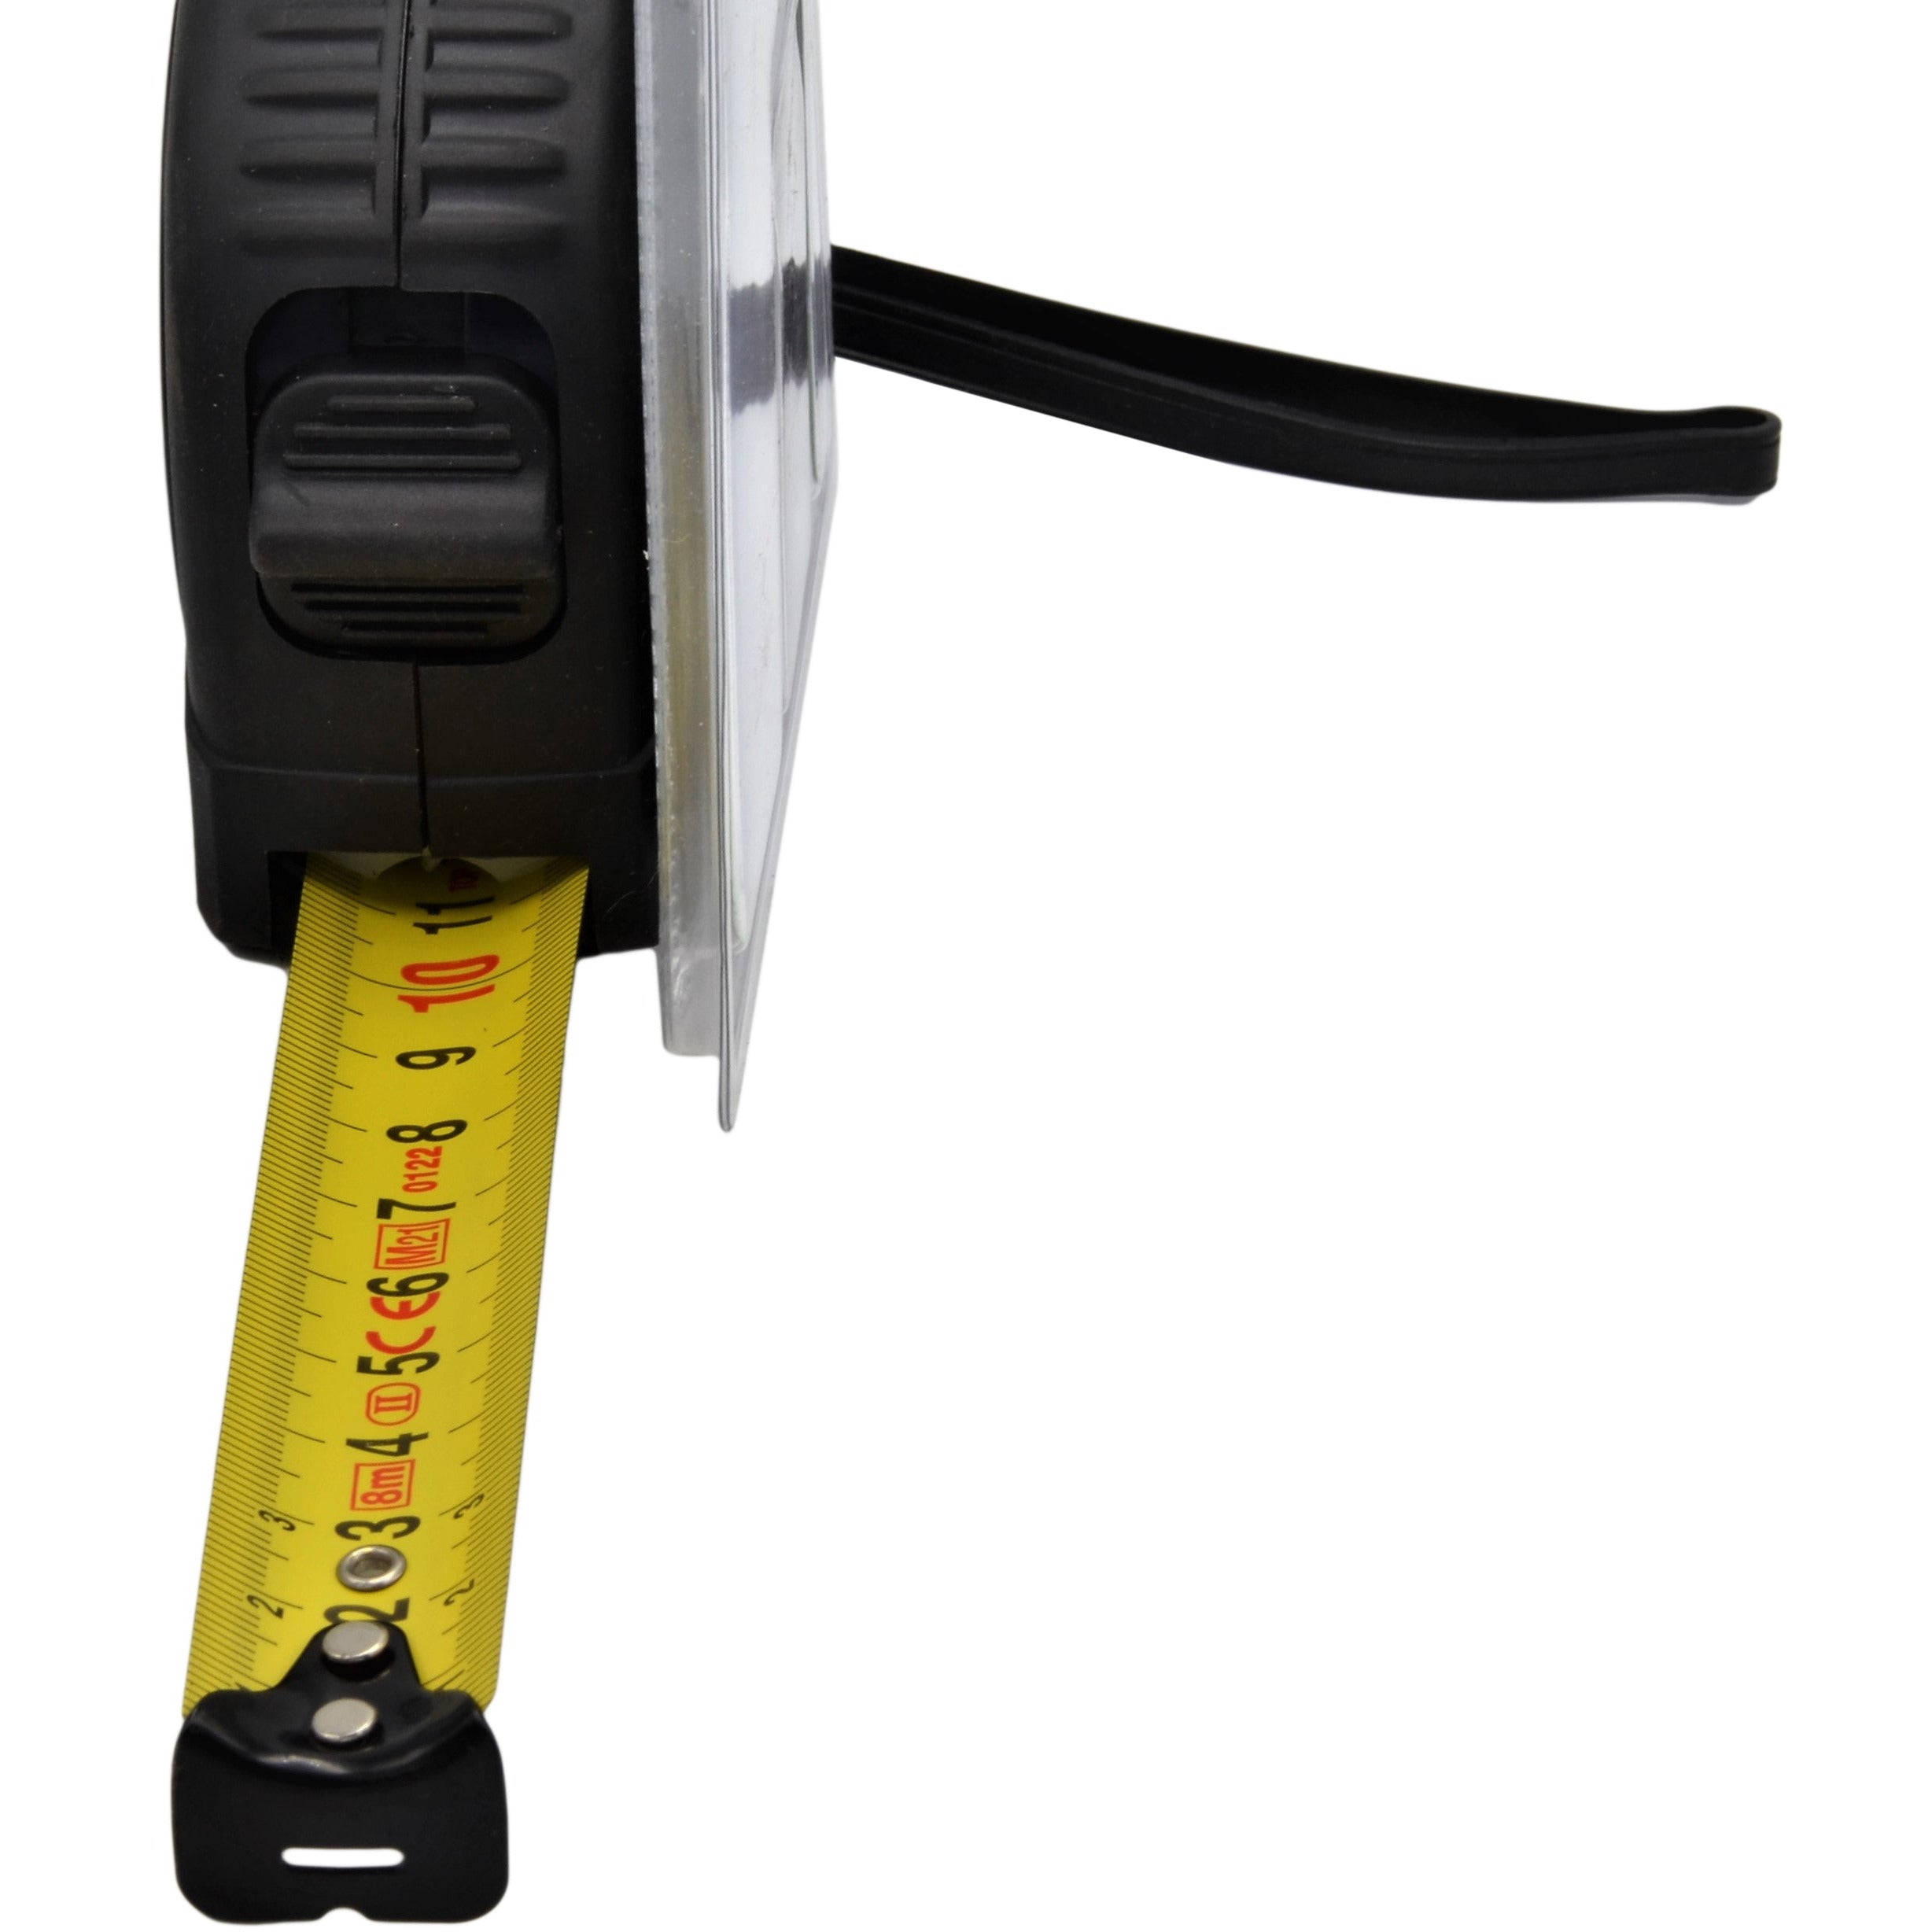 Insize Metric 8M Tape Measure with Auto Retract Series 7140-8